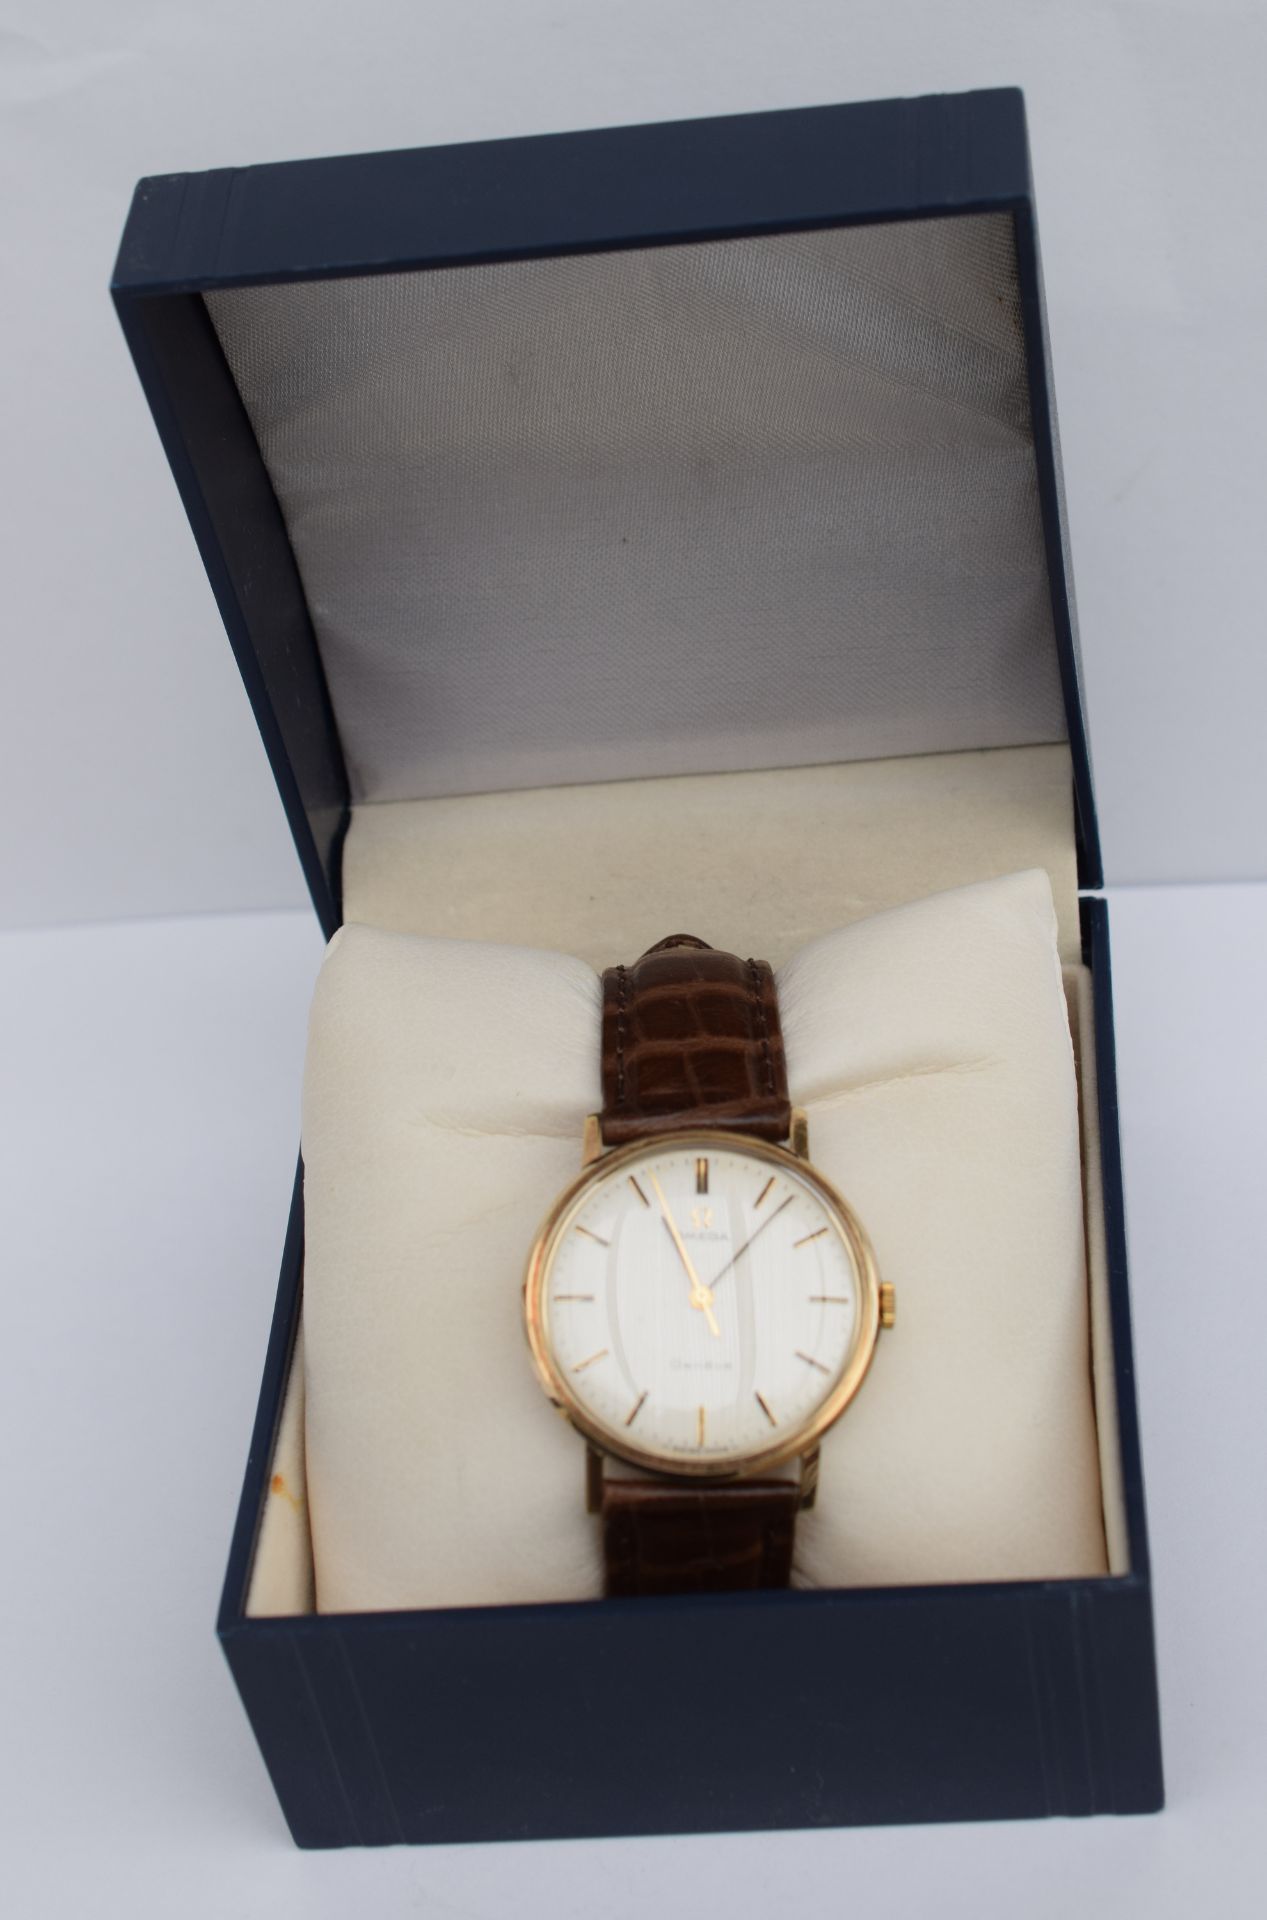 Omega Geneve 9ct Solid Gold Gentleman's Wristwatch Cal 601 - Image 7 of 7